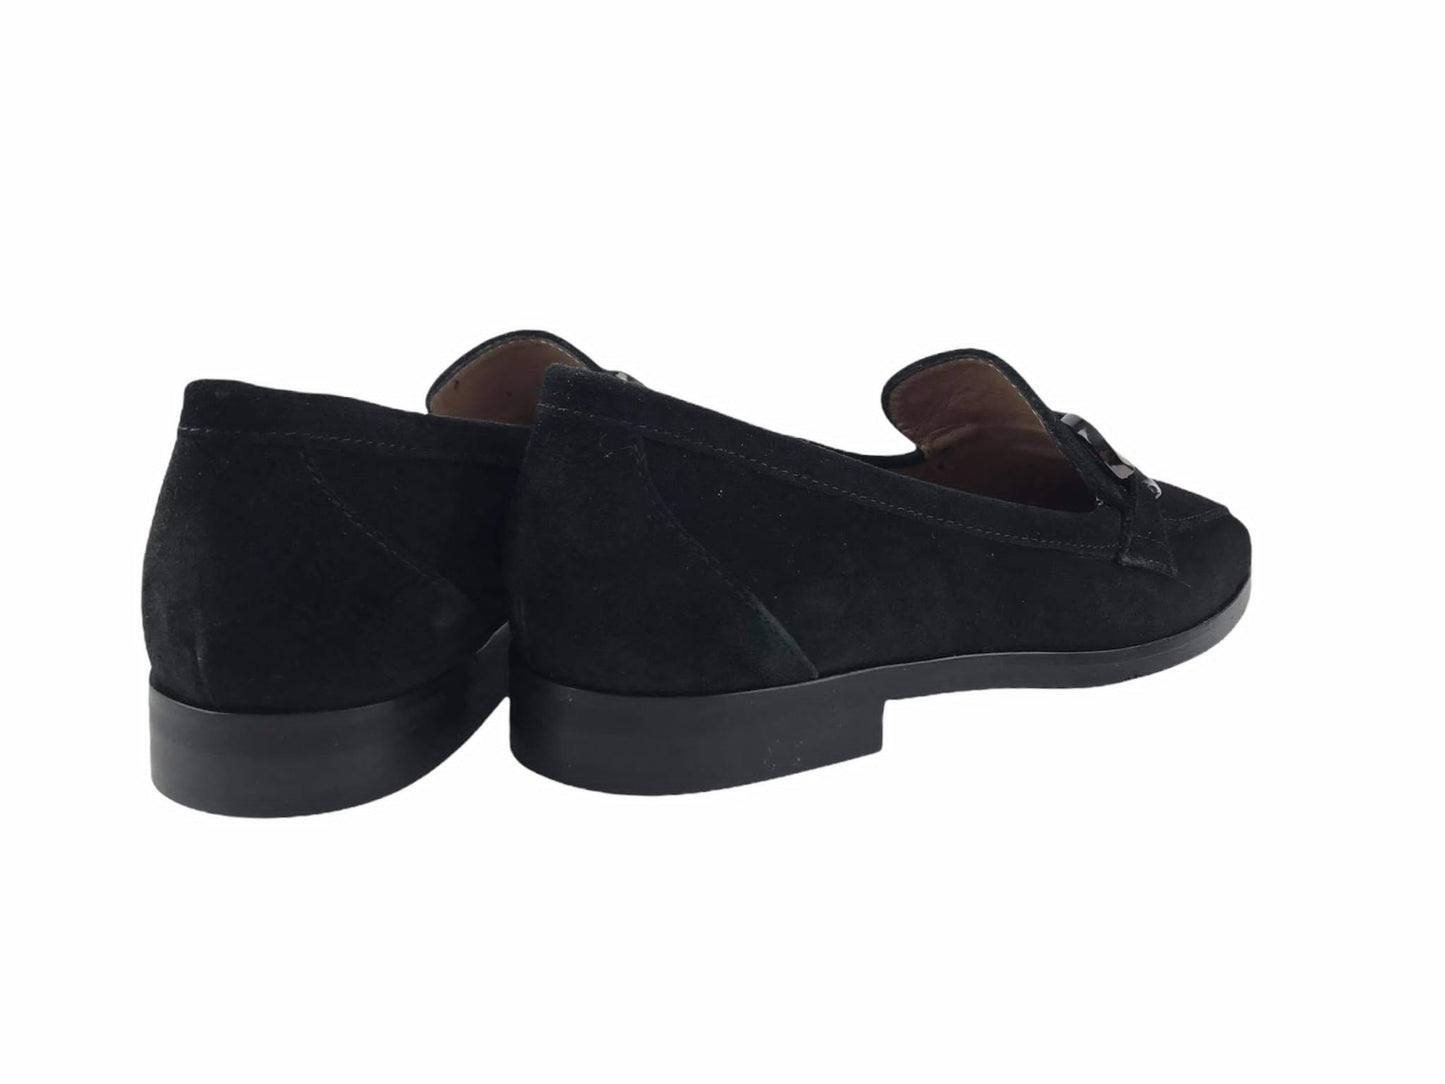 Plumers | Laura men's flat loafers, black suede leather